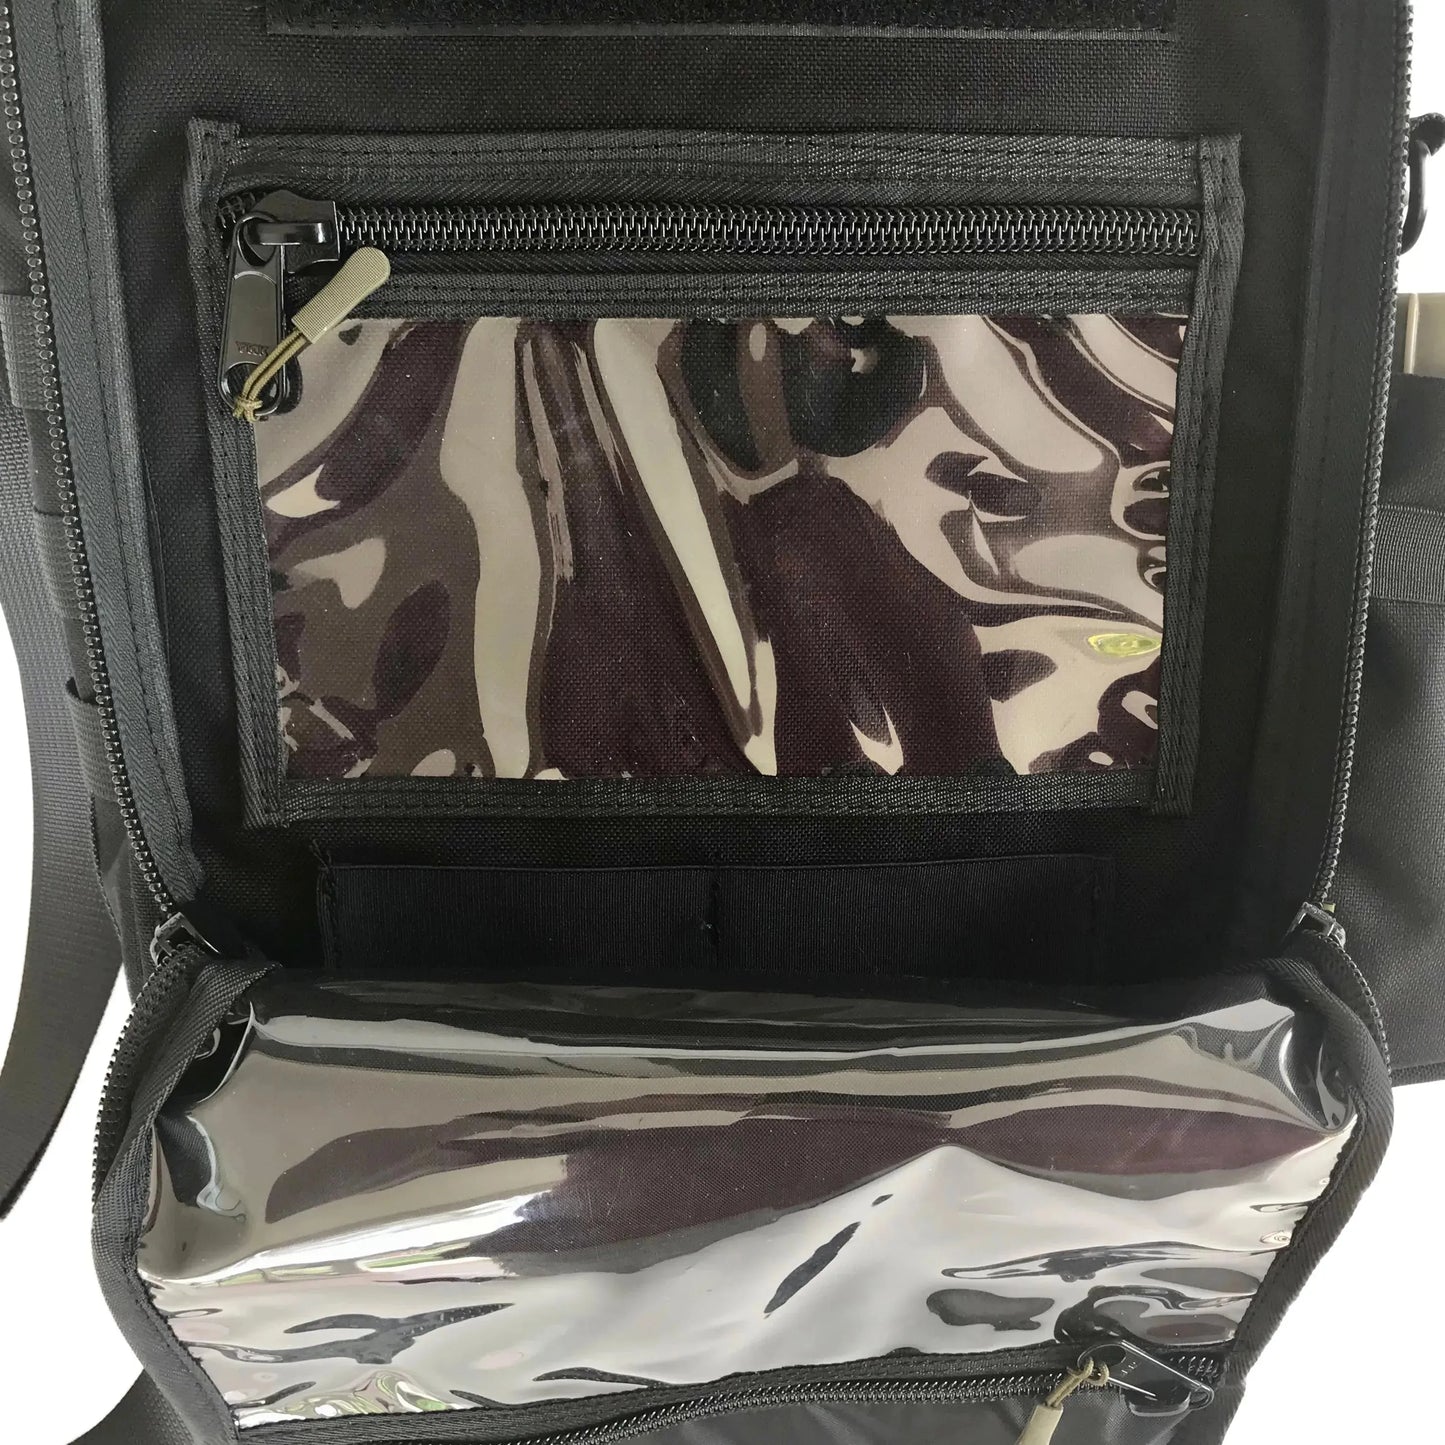 Tactical Bag for Laptop and Field Administration JustGoodKit Tactical Laptop Bag for Field Administration Tactical Bag for Field Administration